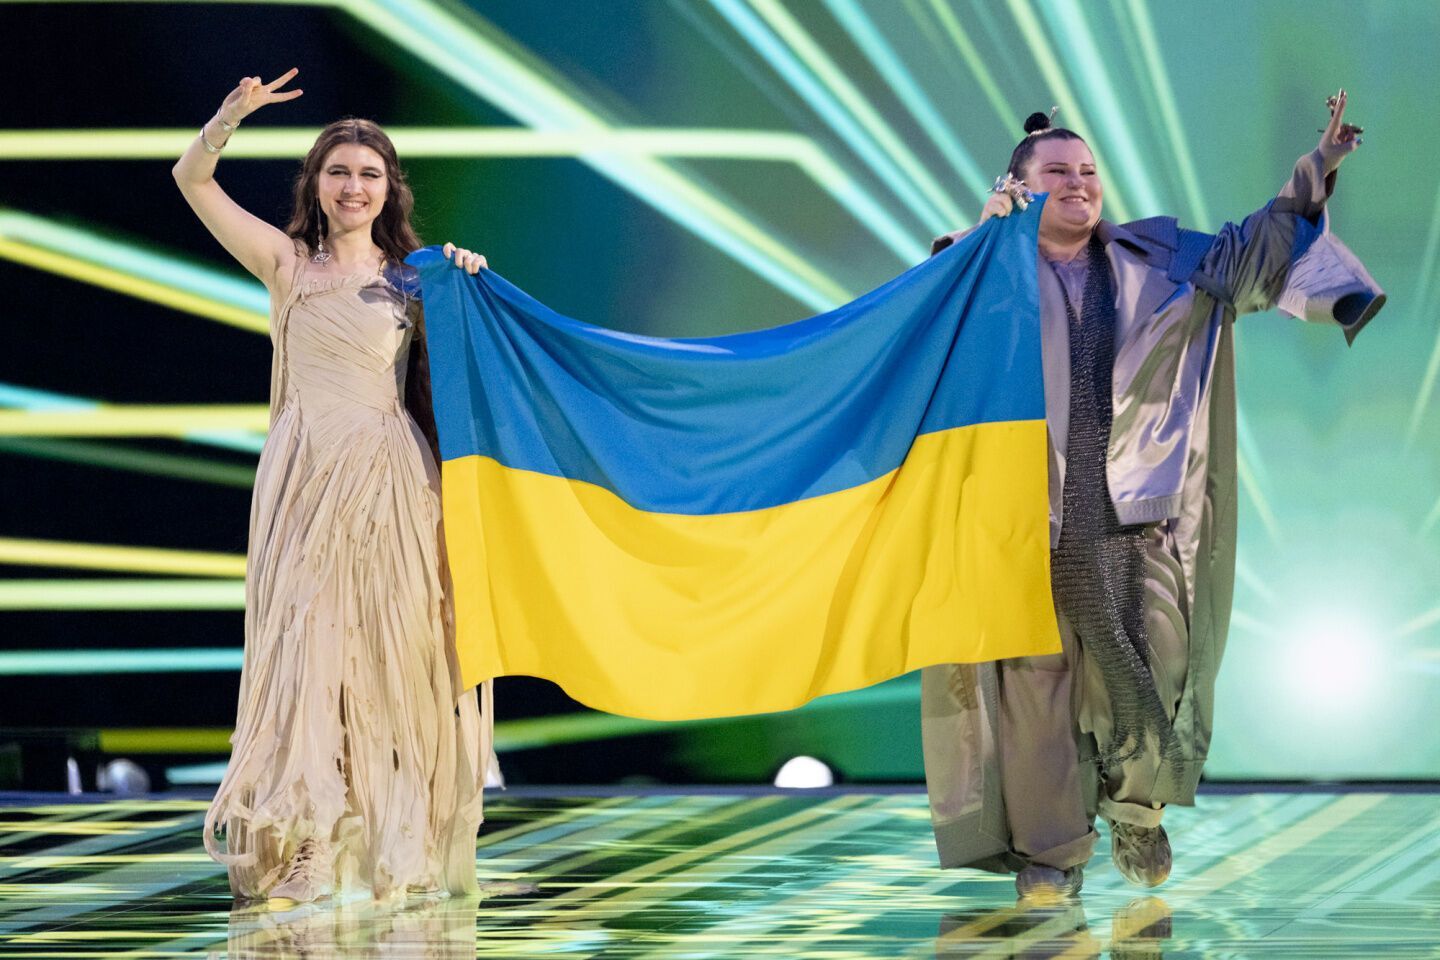 How many points did Ukraine get from the jury table of results